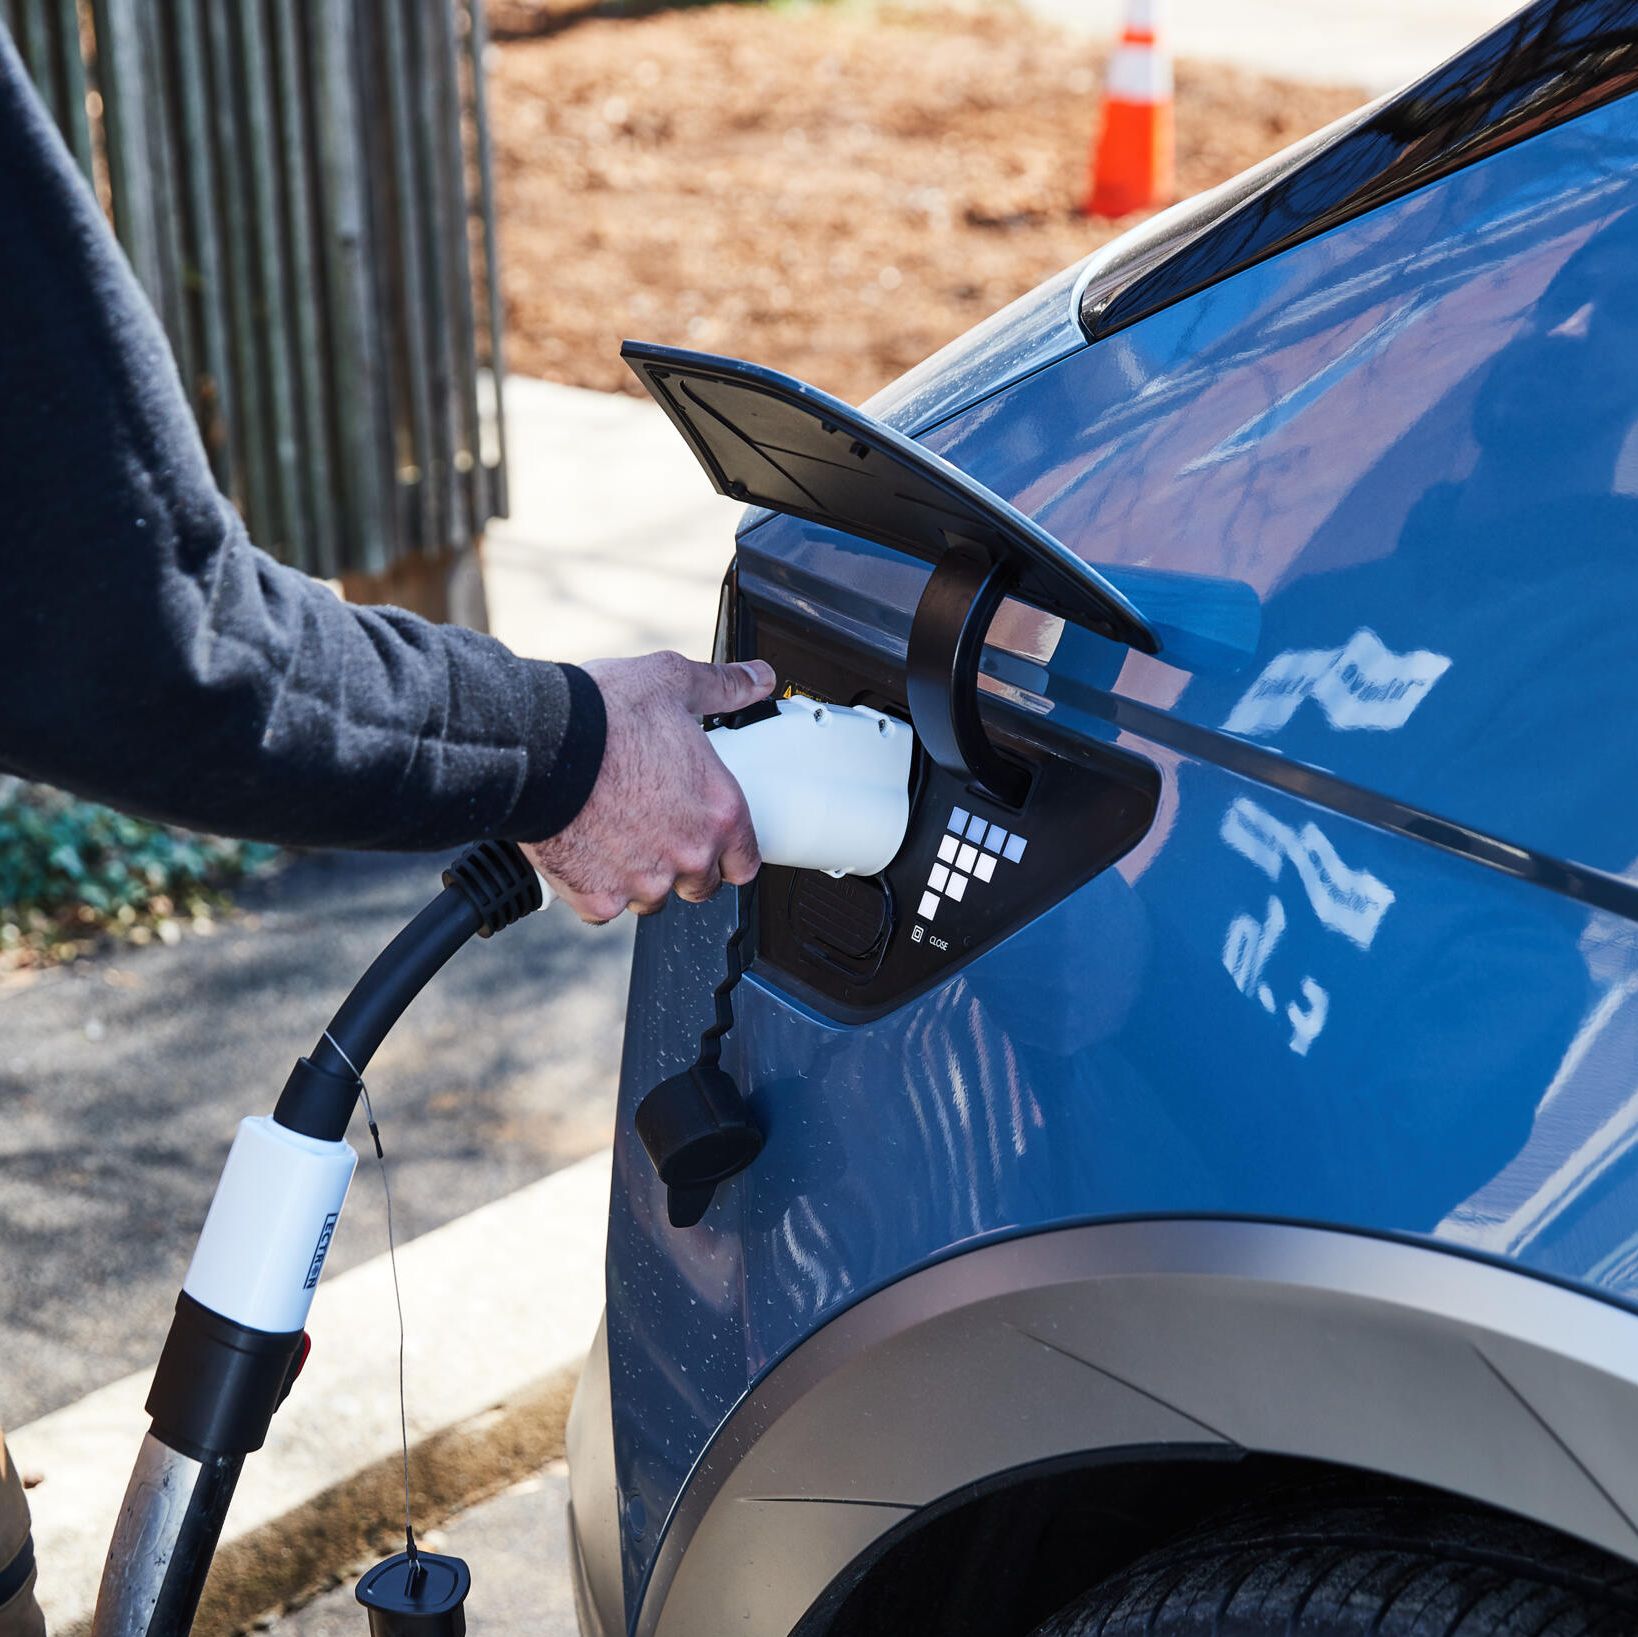 You Can Power Any EV at Tesla's Charging Points With This Adapter